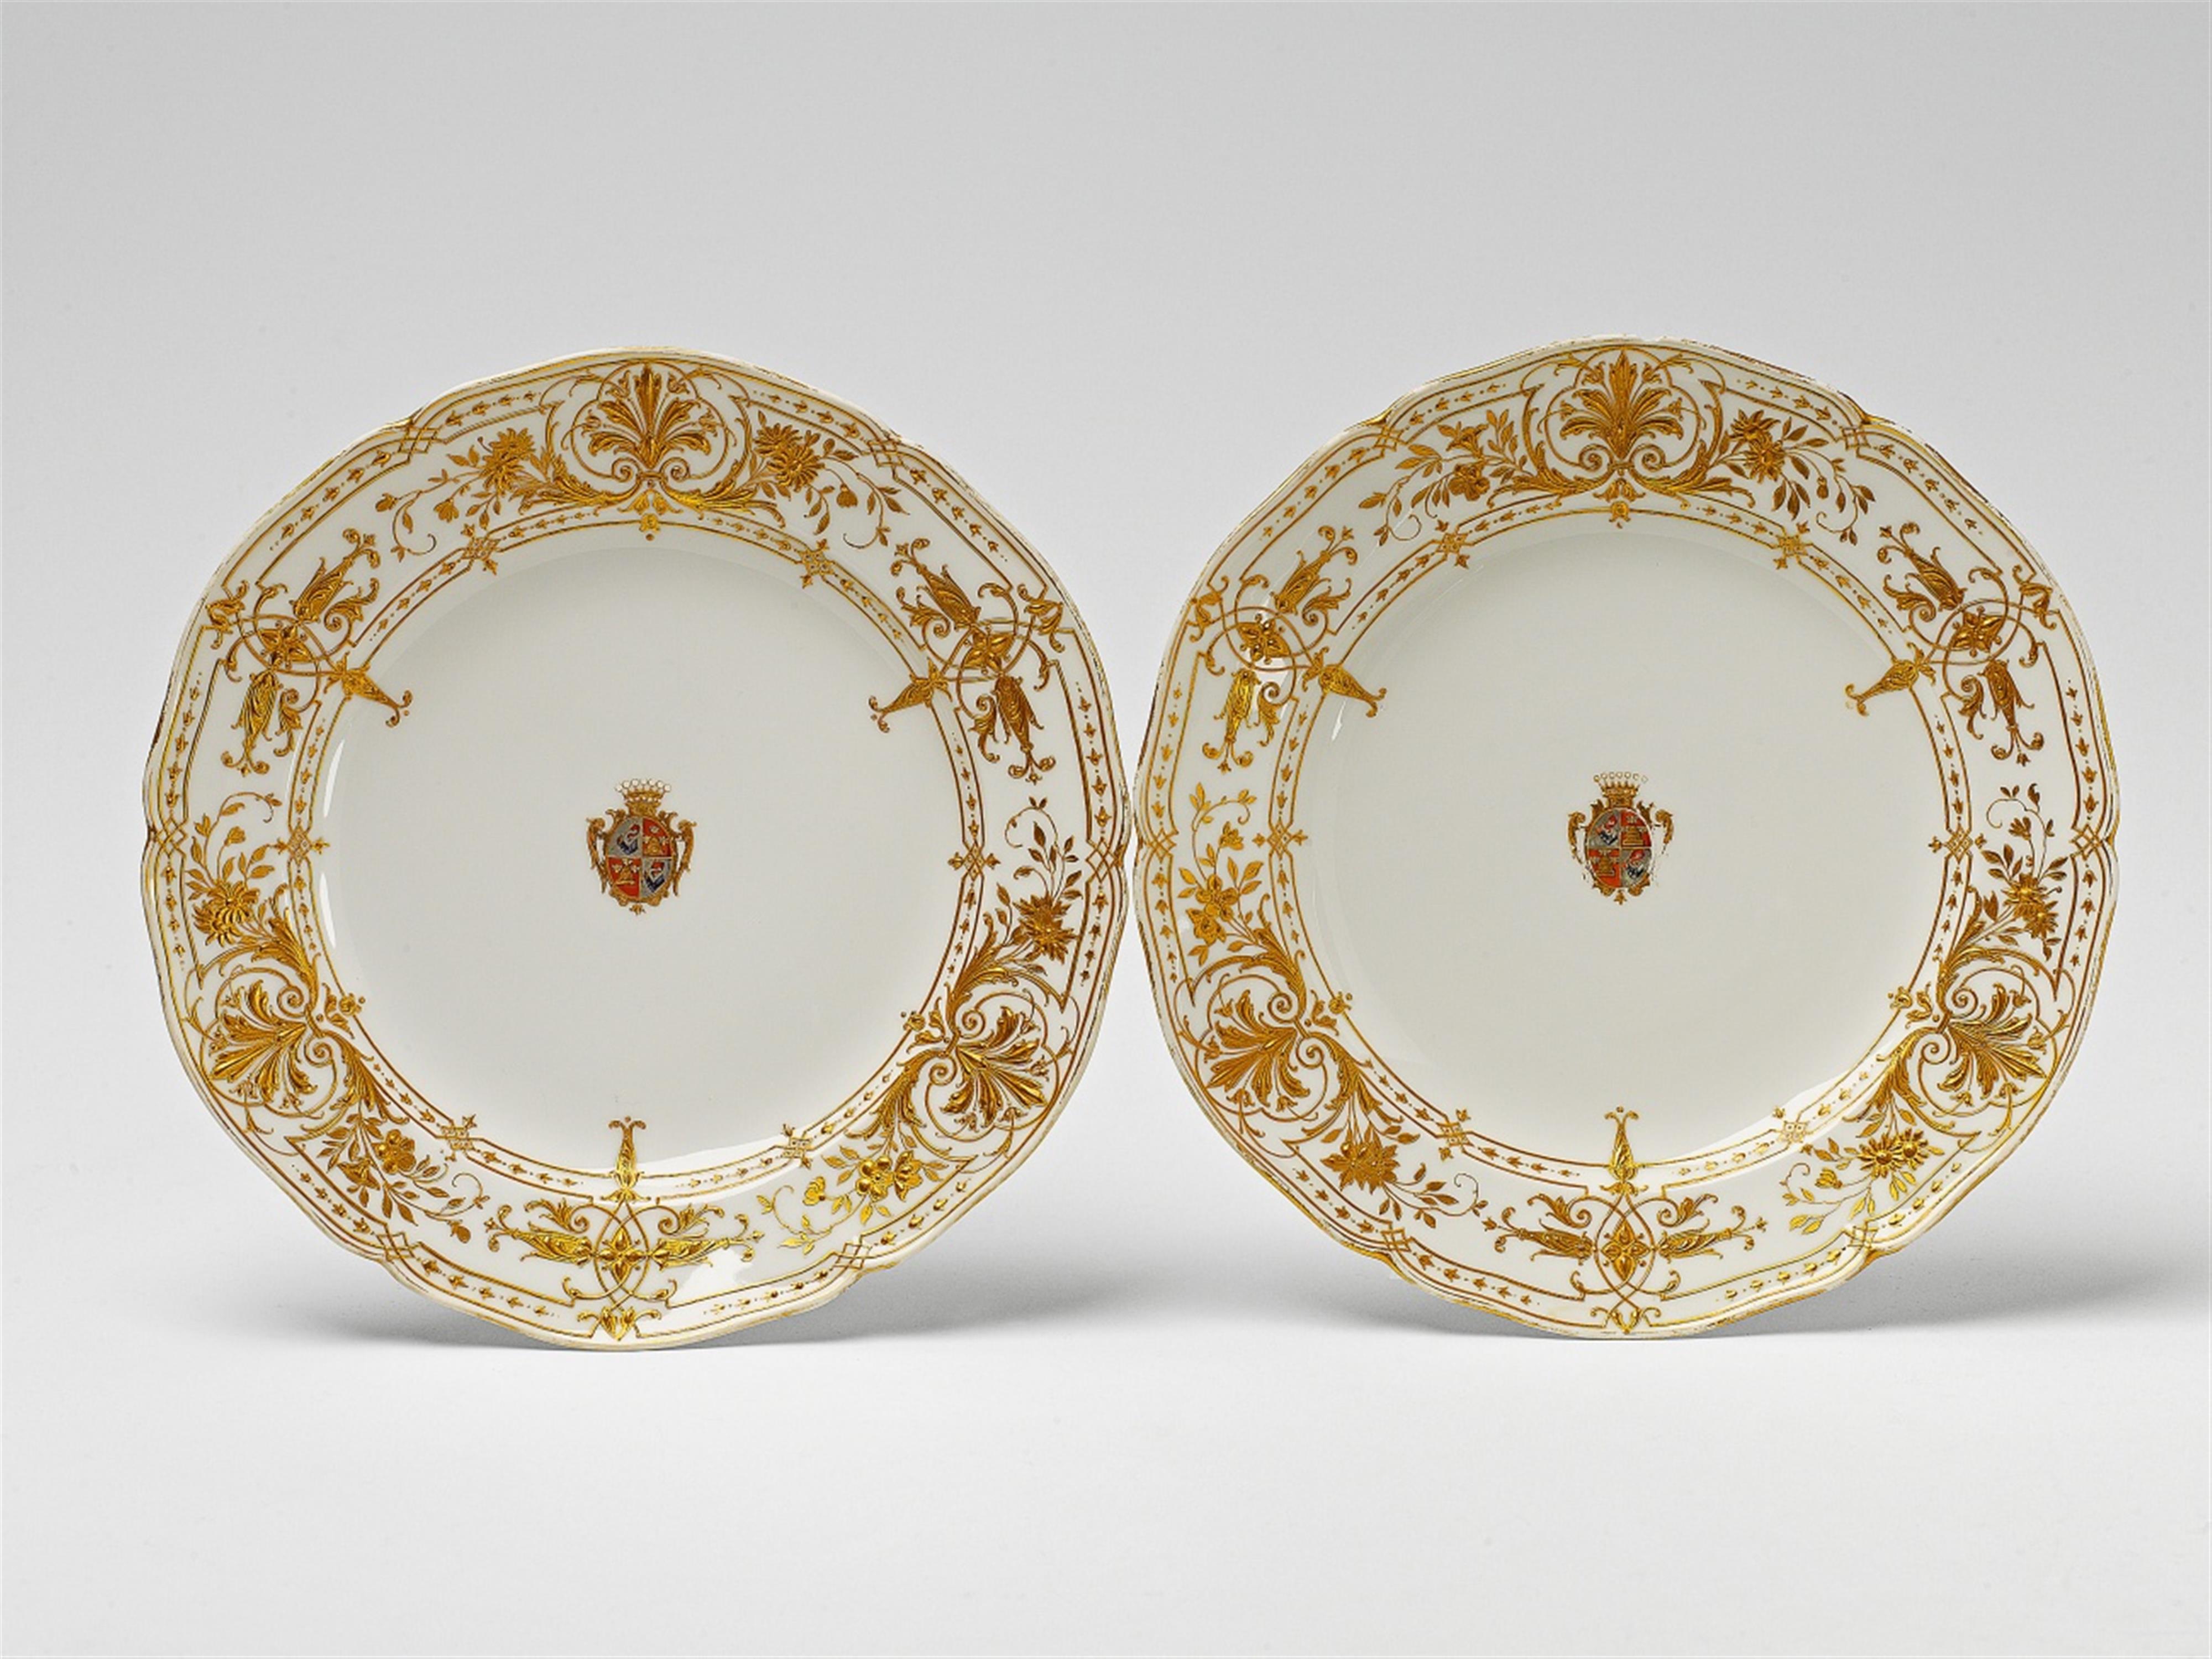 Two Berlin KPM porcelain plates from a heraldic service - image-1